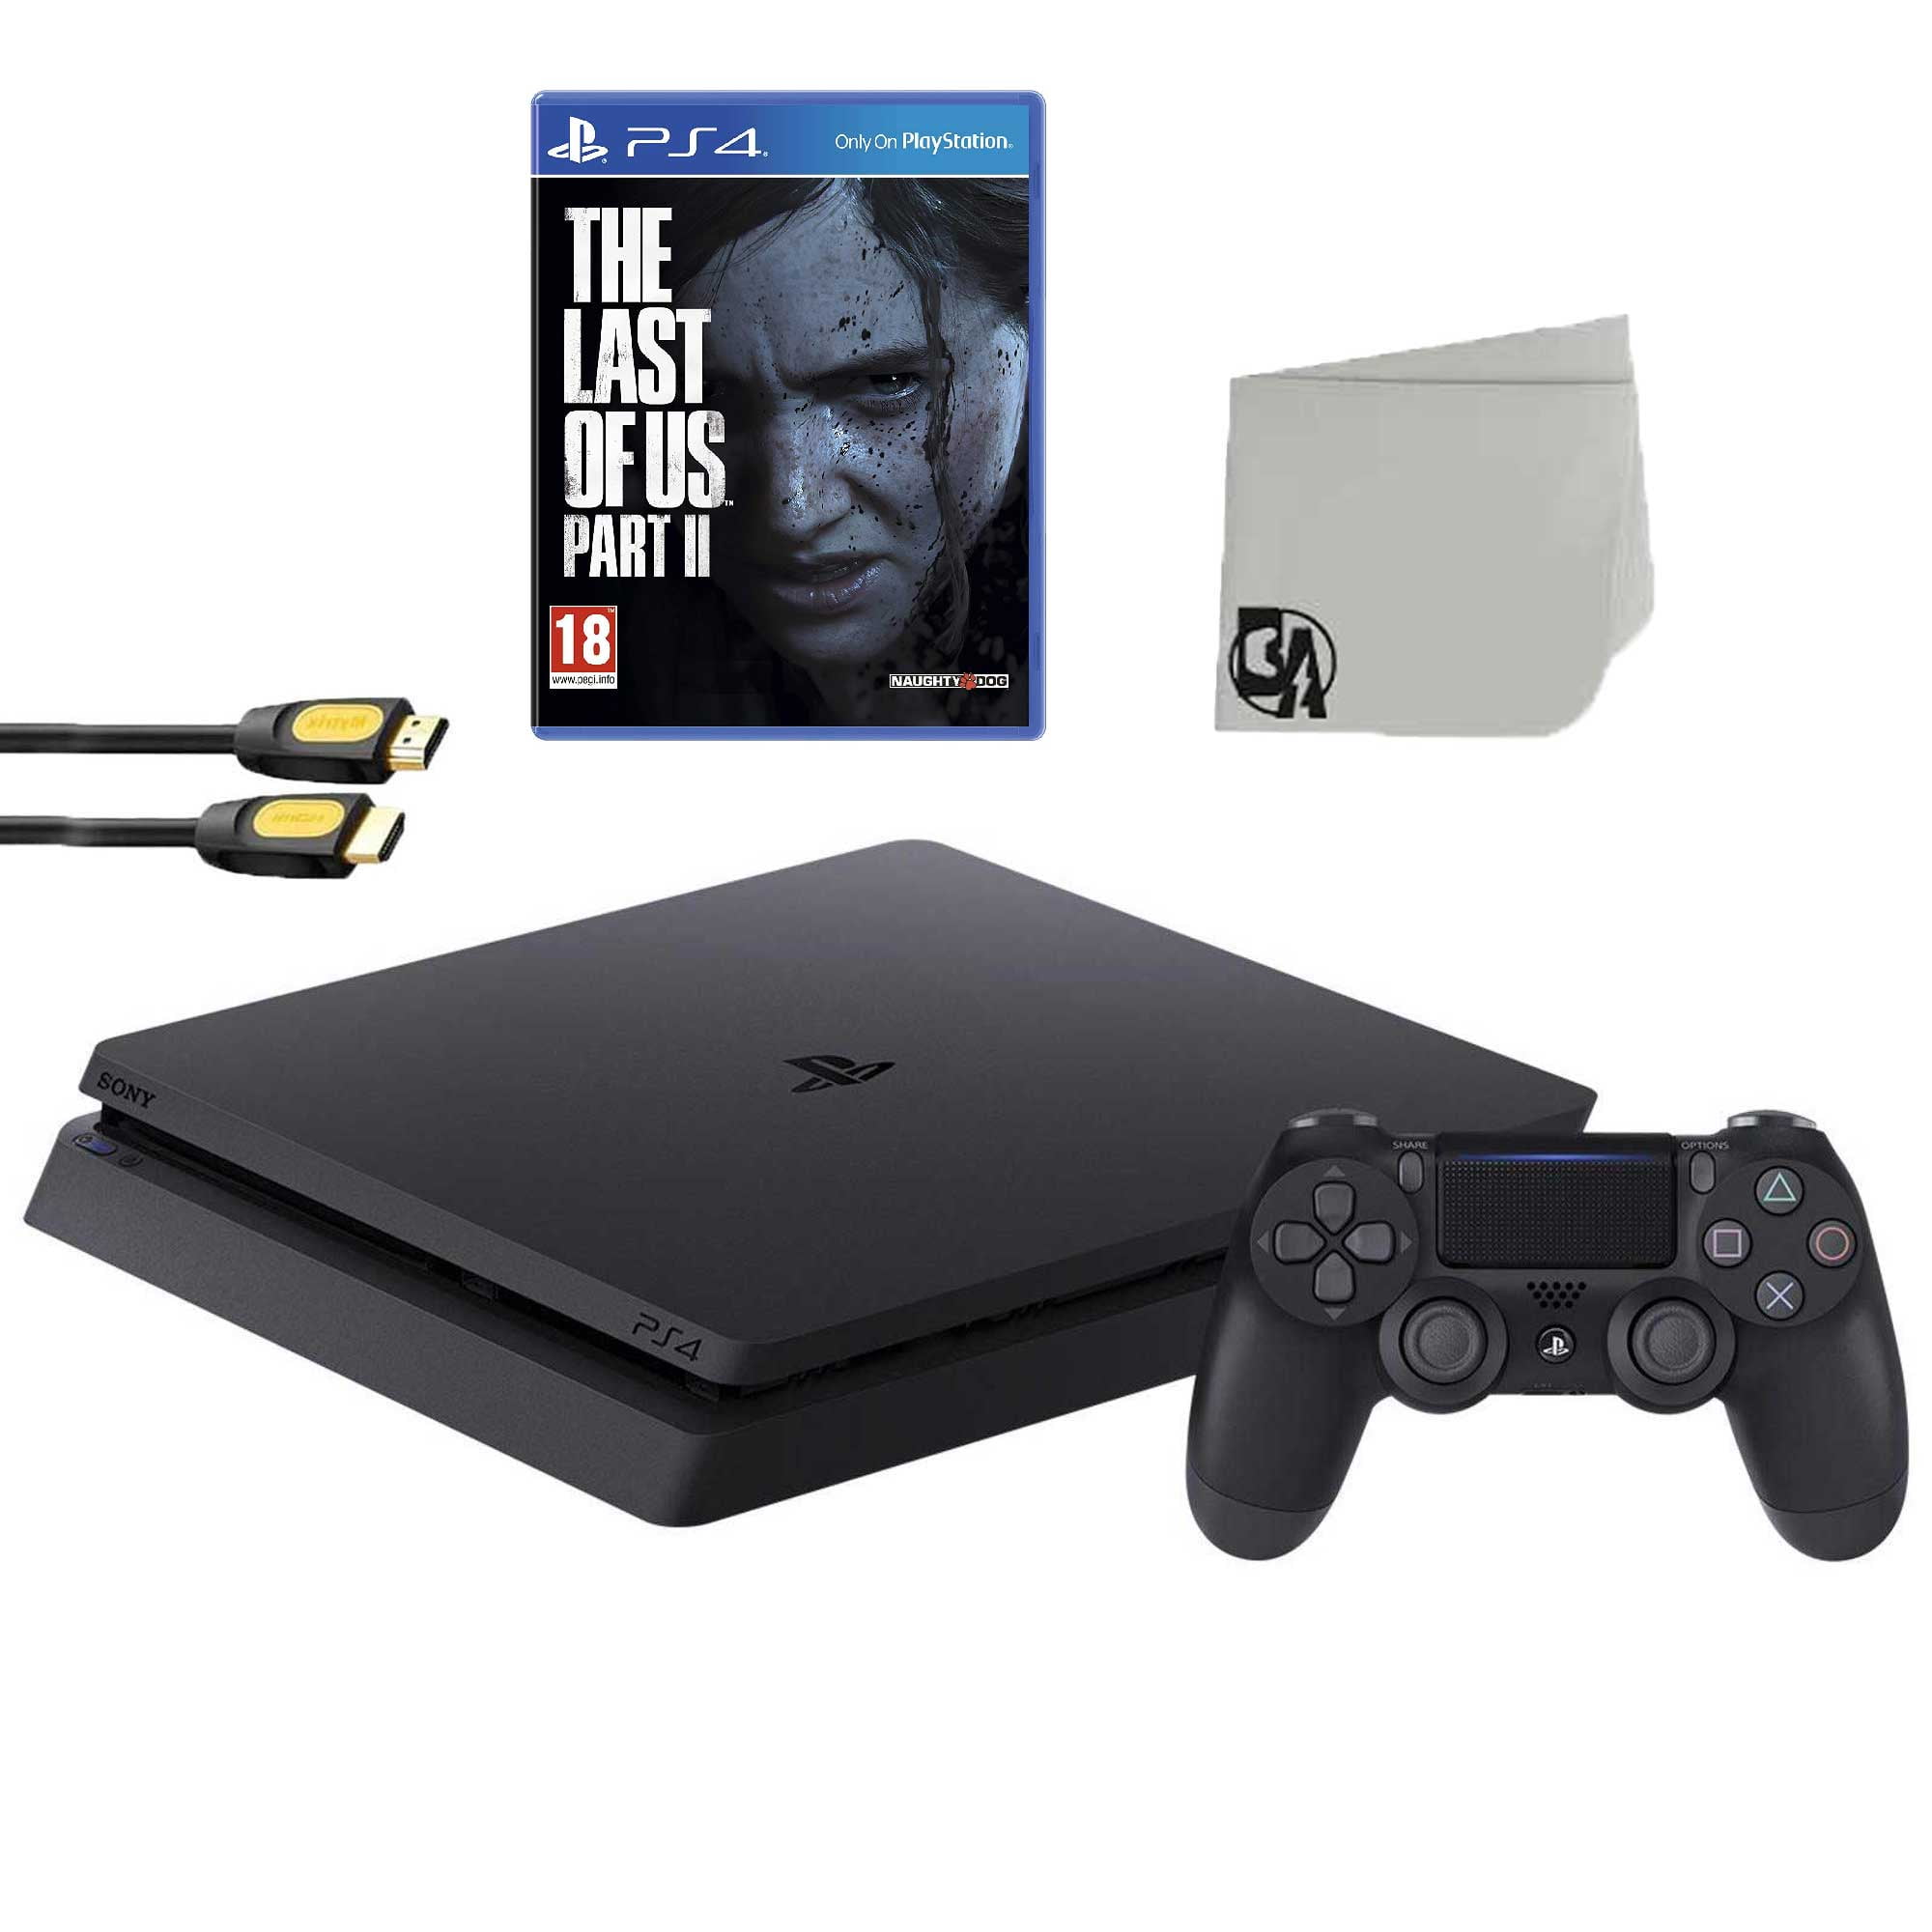 Sony 2215A PlayStation 4 Slim 500GB Gaming Console Black with Days Gone  Game BOLT AXTION Bundle Lke New